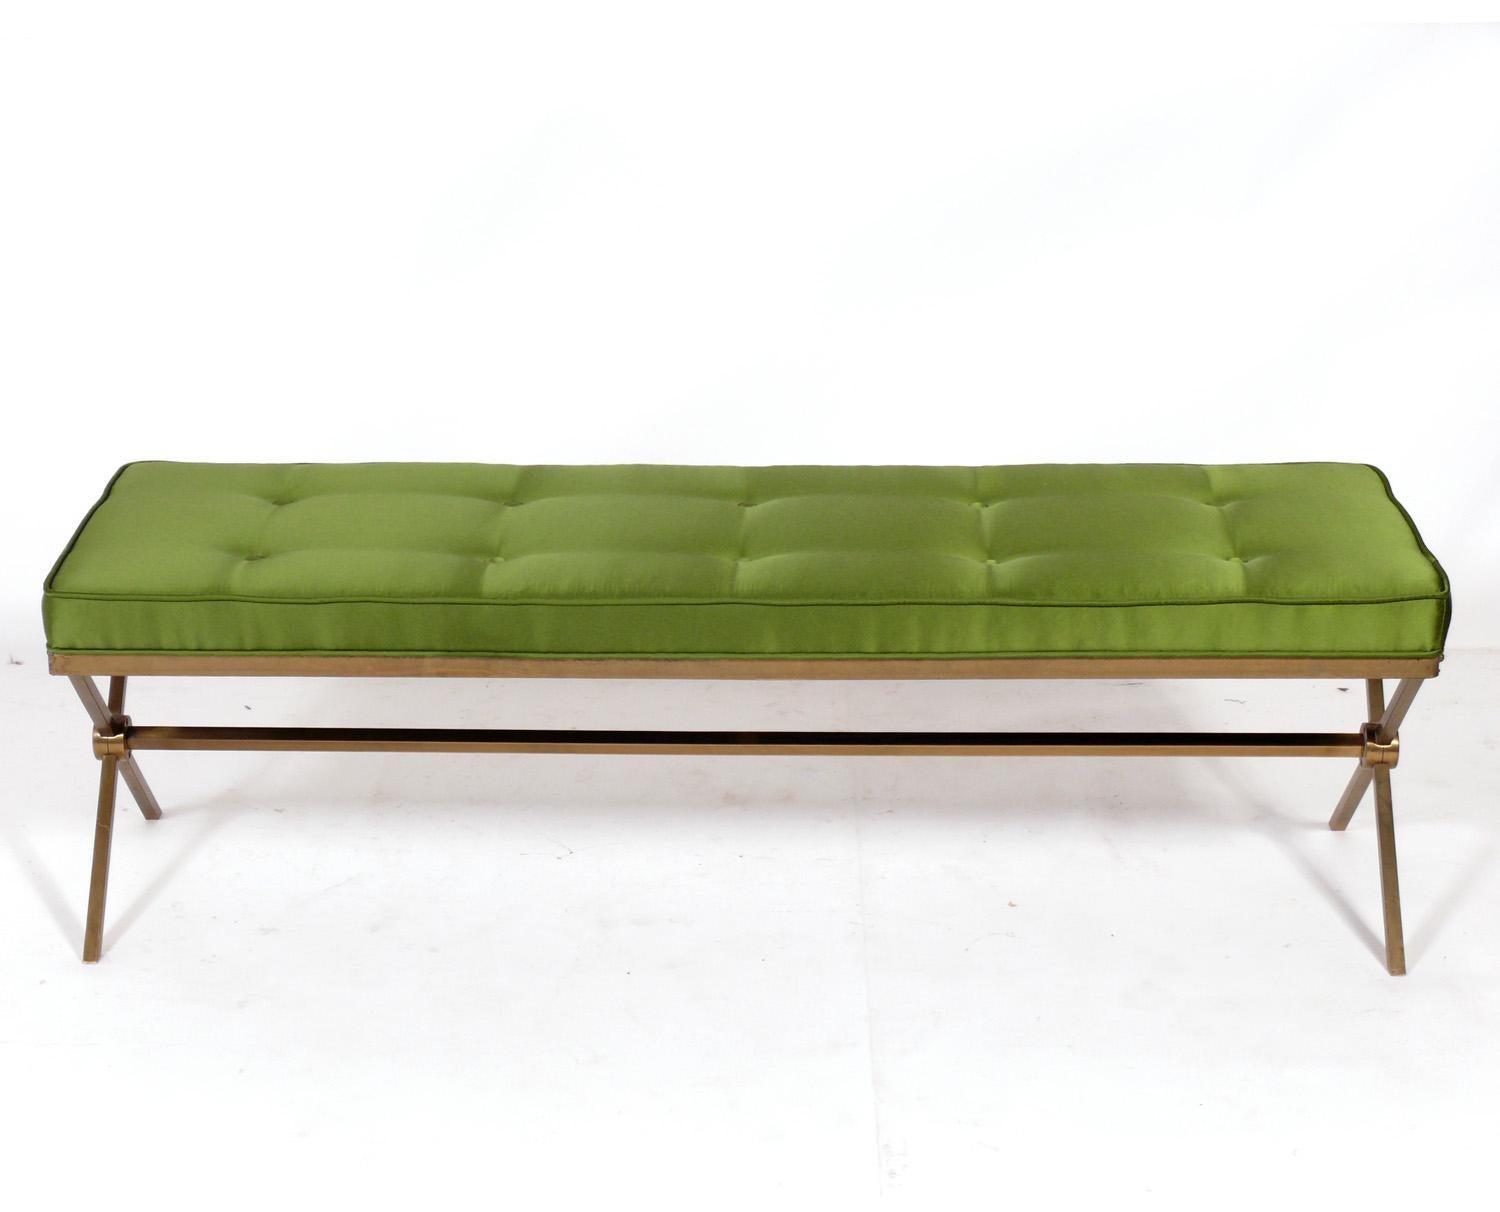 Elegant brass X base bench, American, circa 1960s. Newly reupholstered in a green sateen fabric. Brass base retains warm original patina.